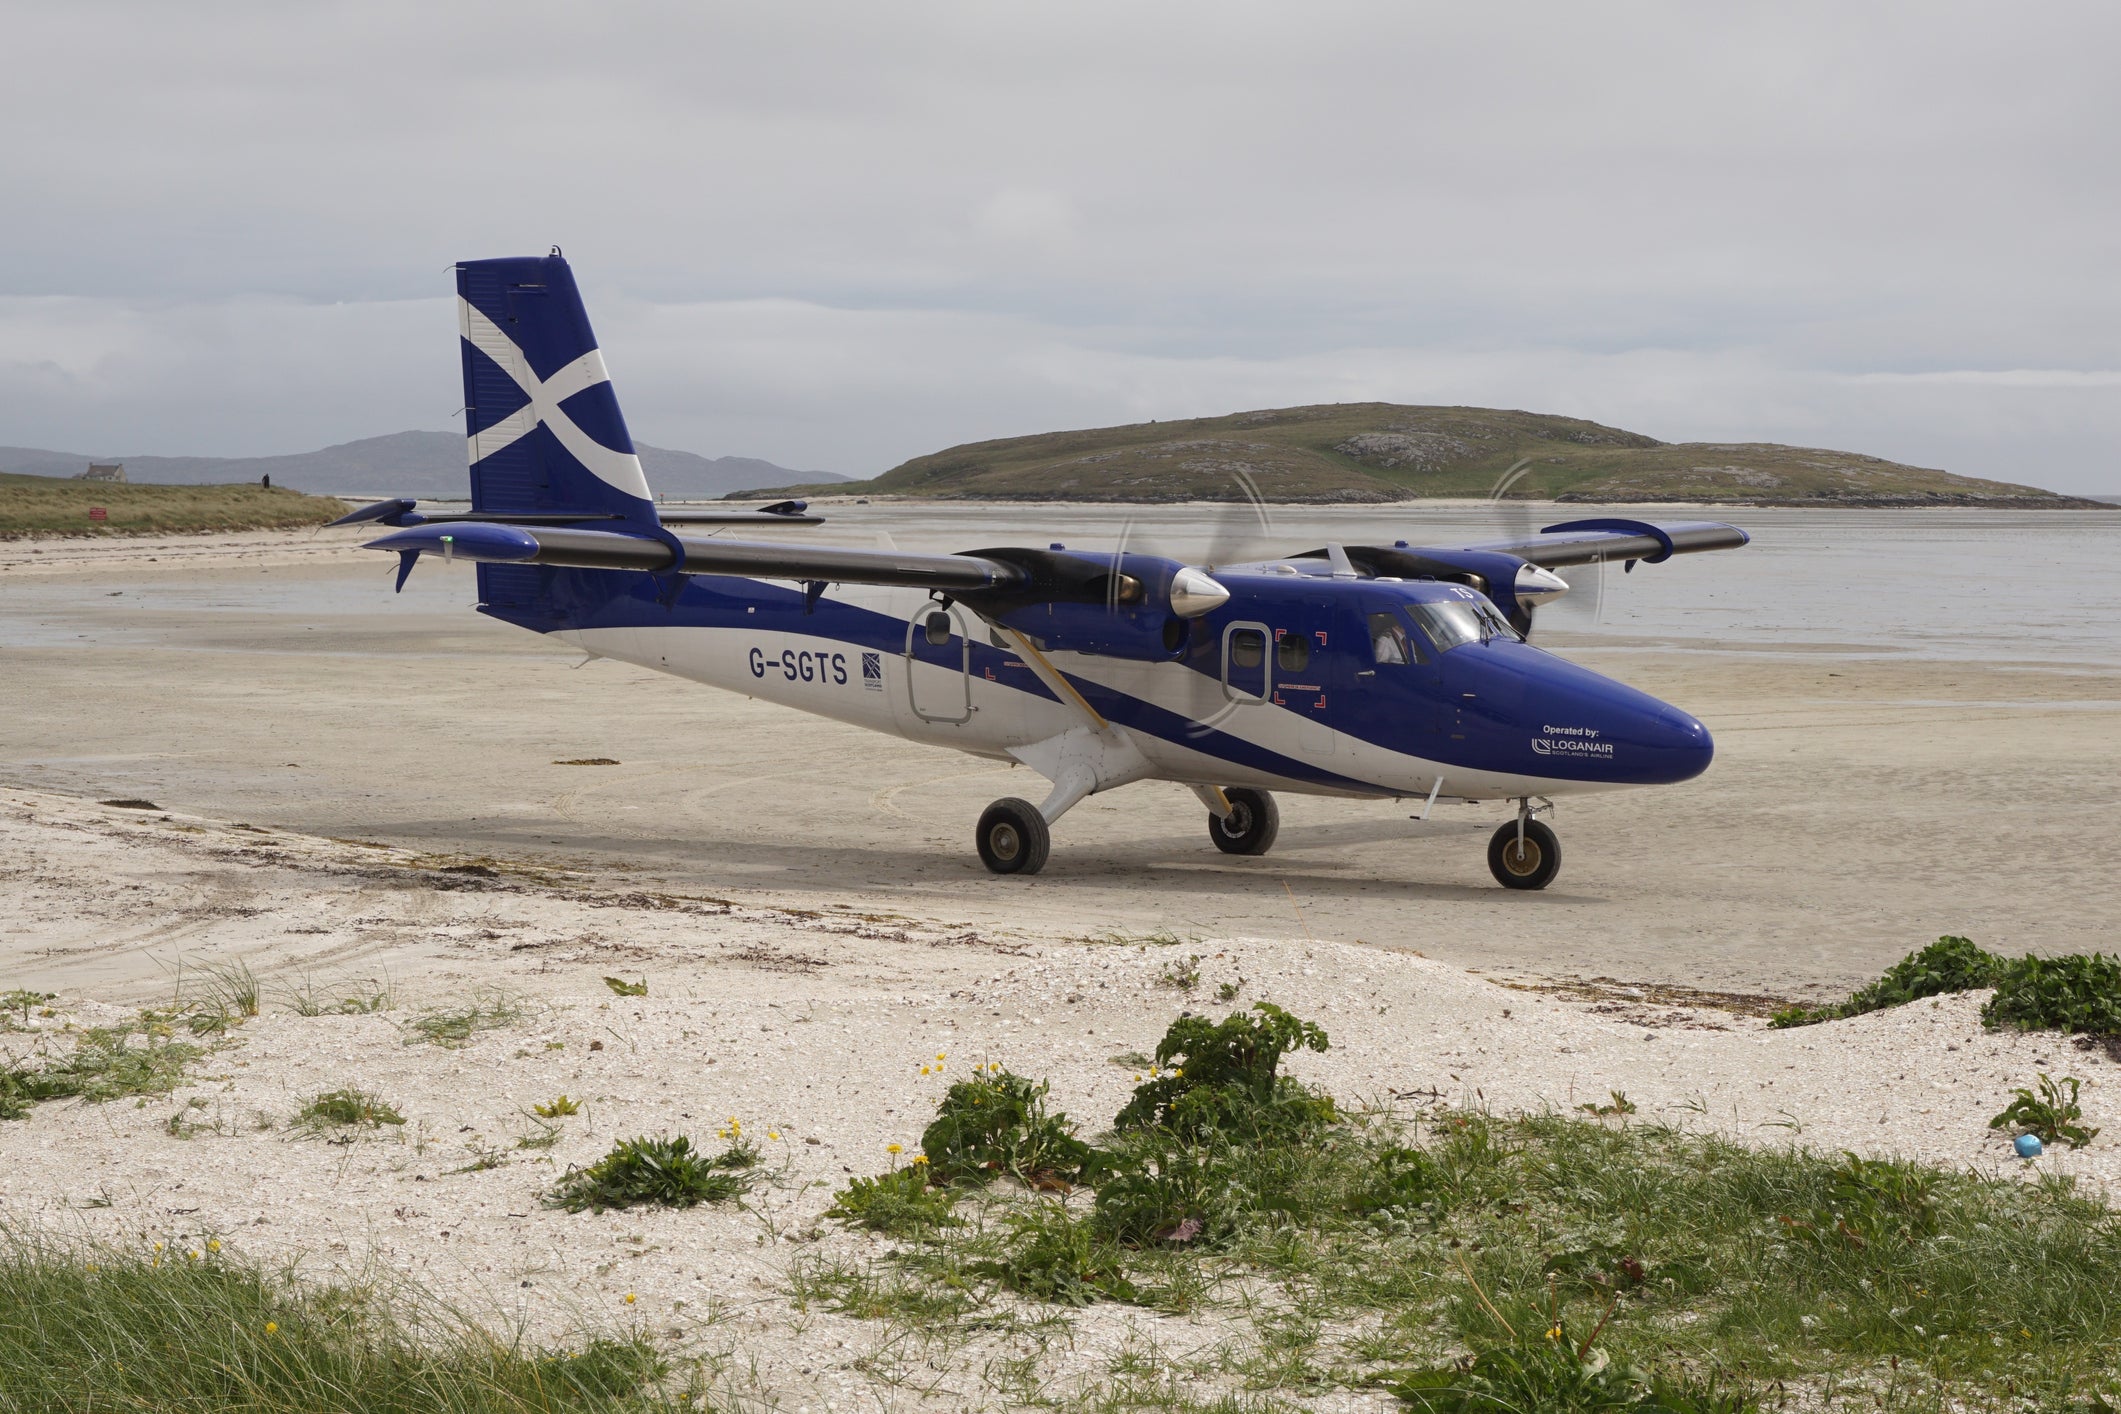 A small passenger plane on the runway for the small airport on the island of Barra